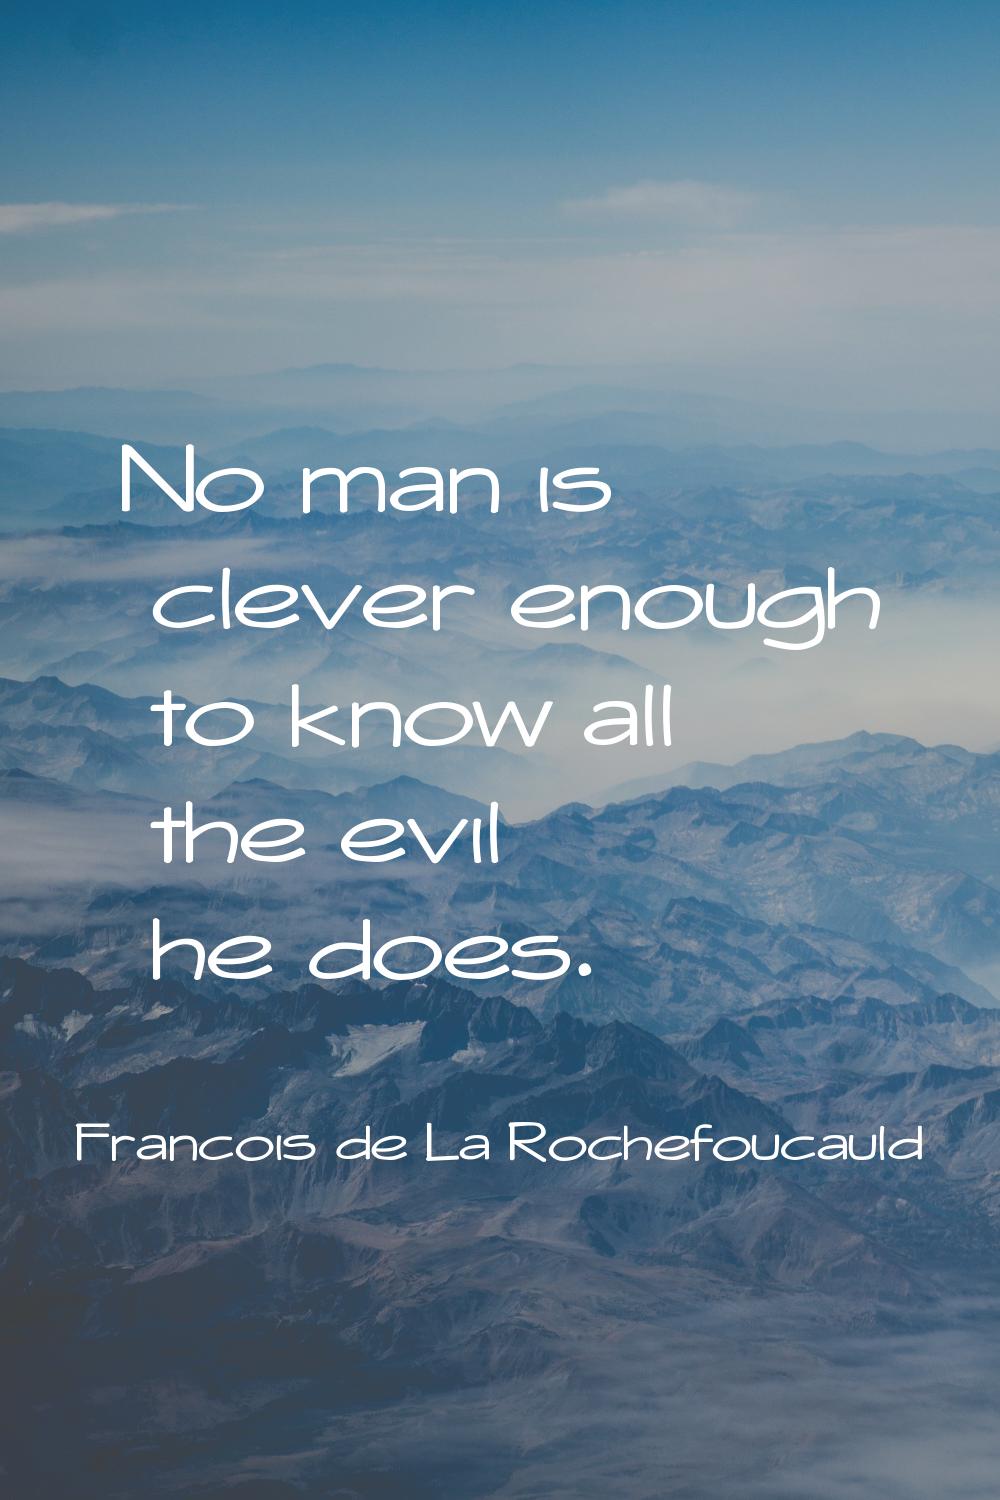 No man is clever enough to know all the evil he does.